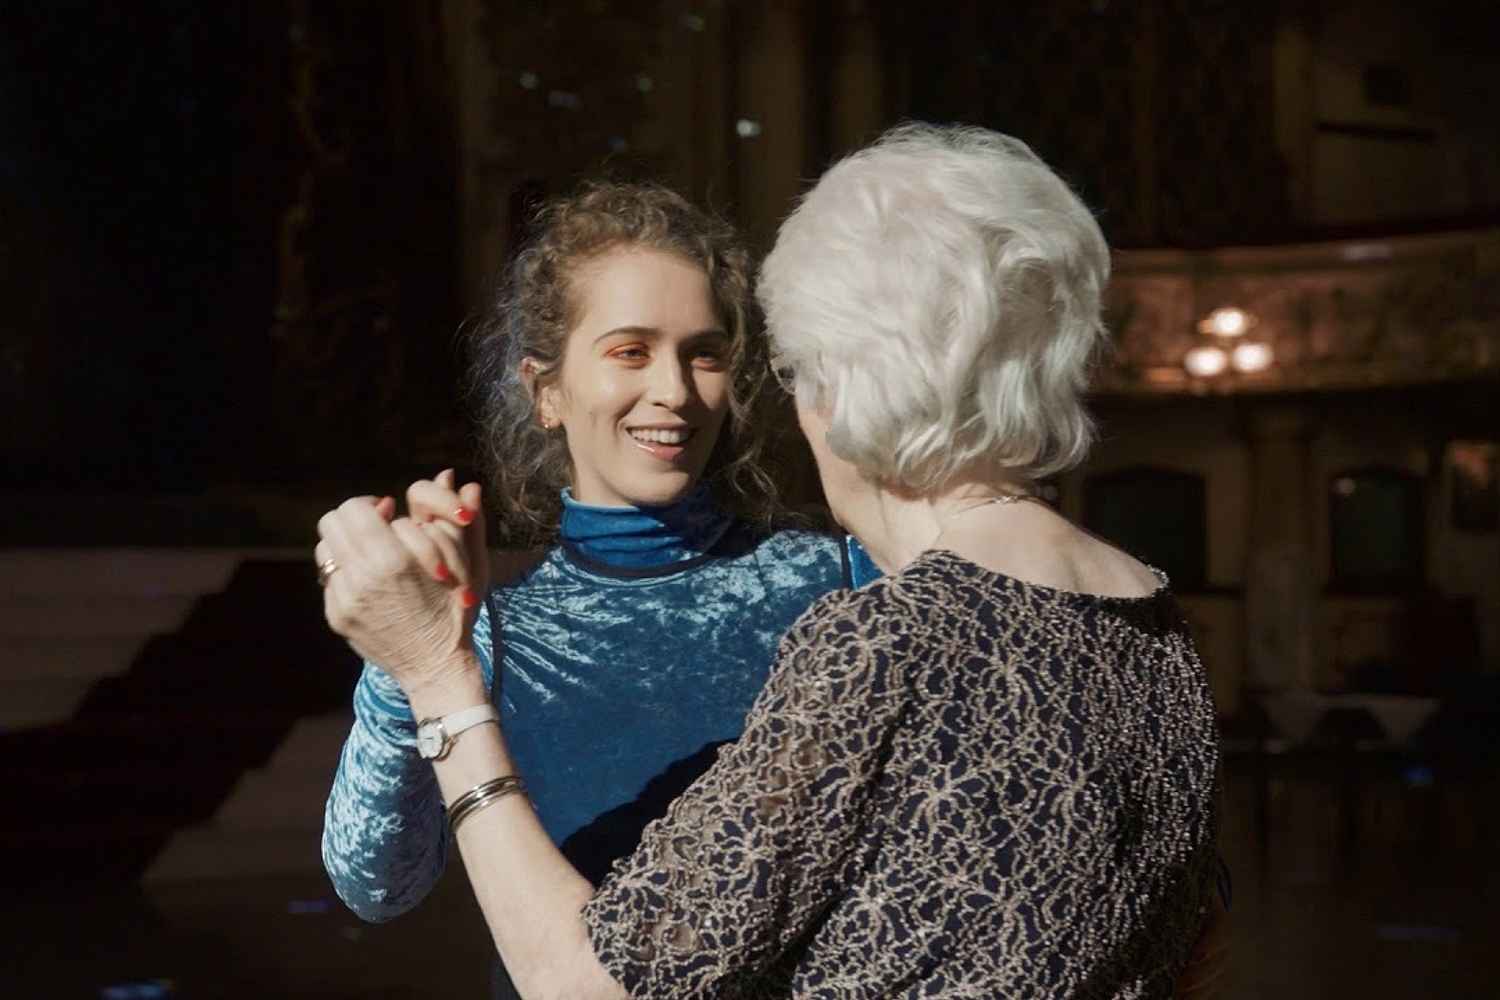 Rae Morris hits the ballroom in ‘Dancing With Character’ video